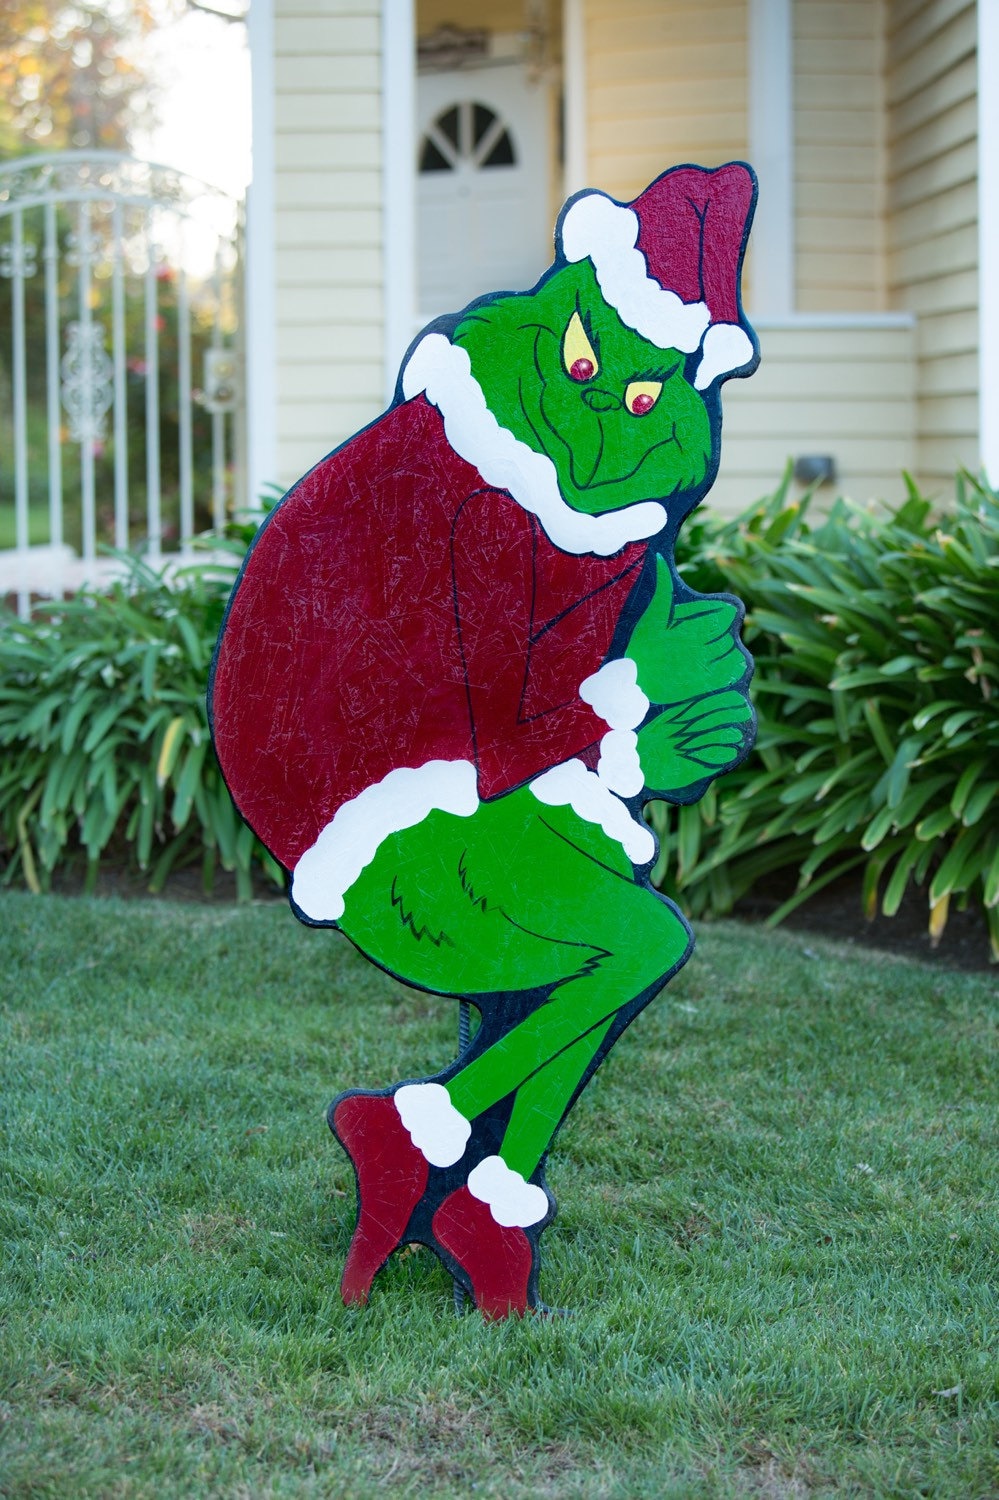 Grinch stealing Christmas lights by HolidayLawnCutouts on Etsy